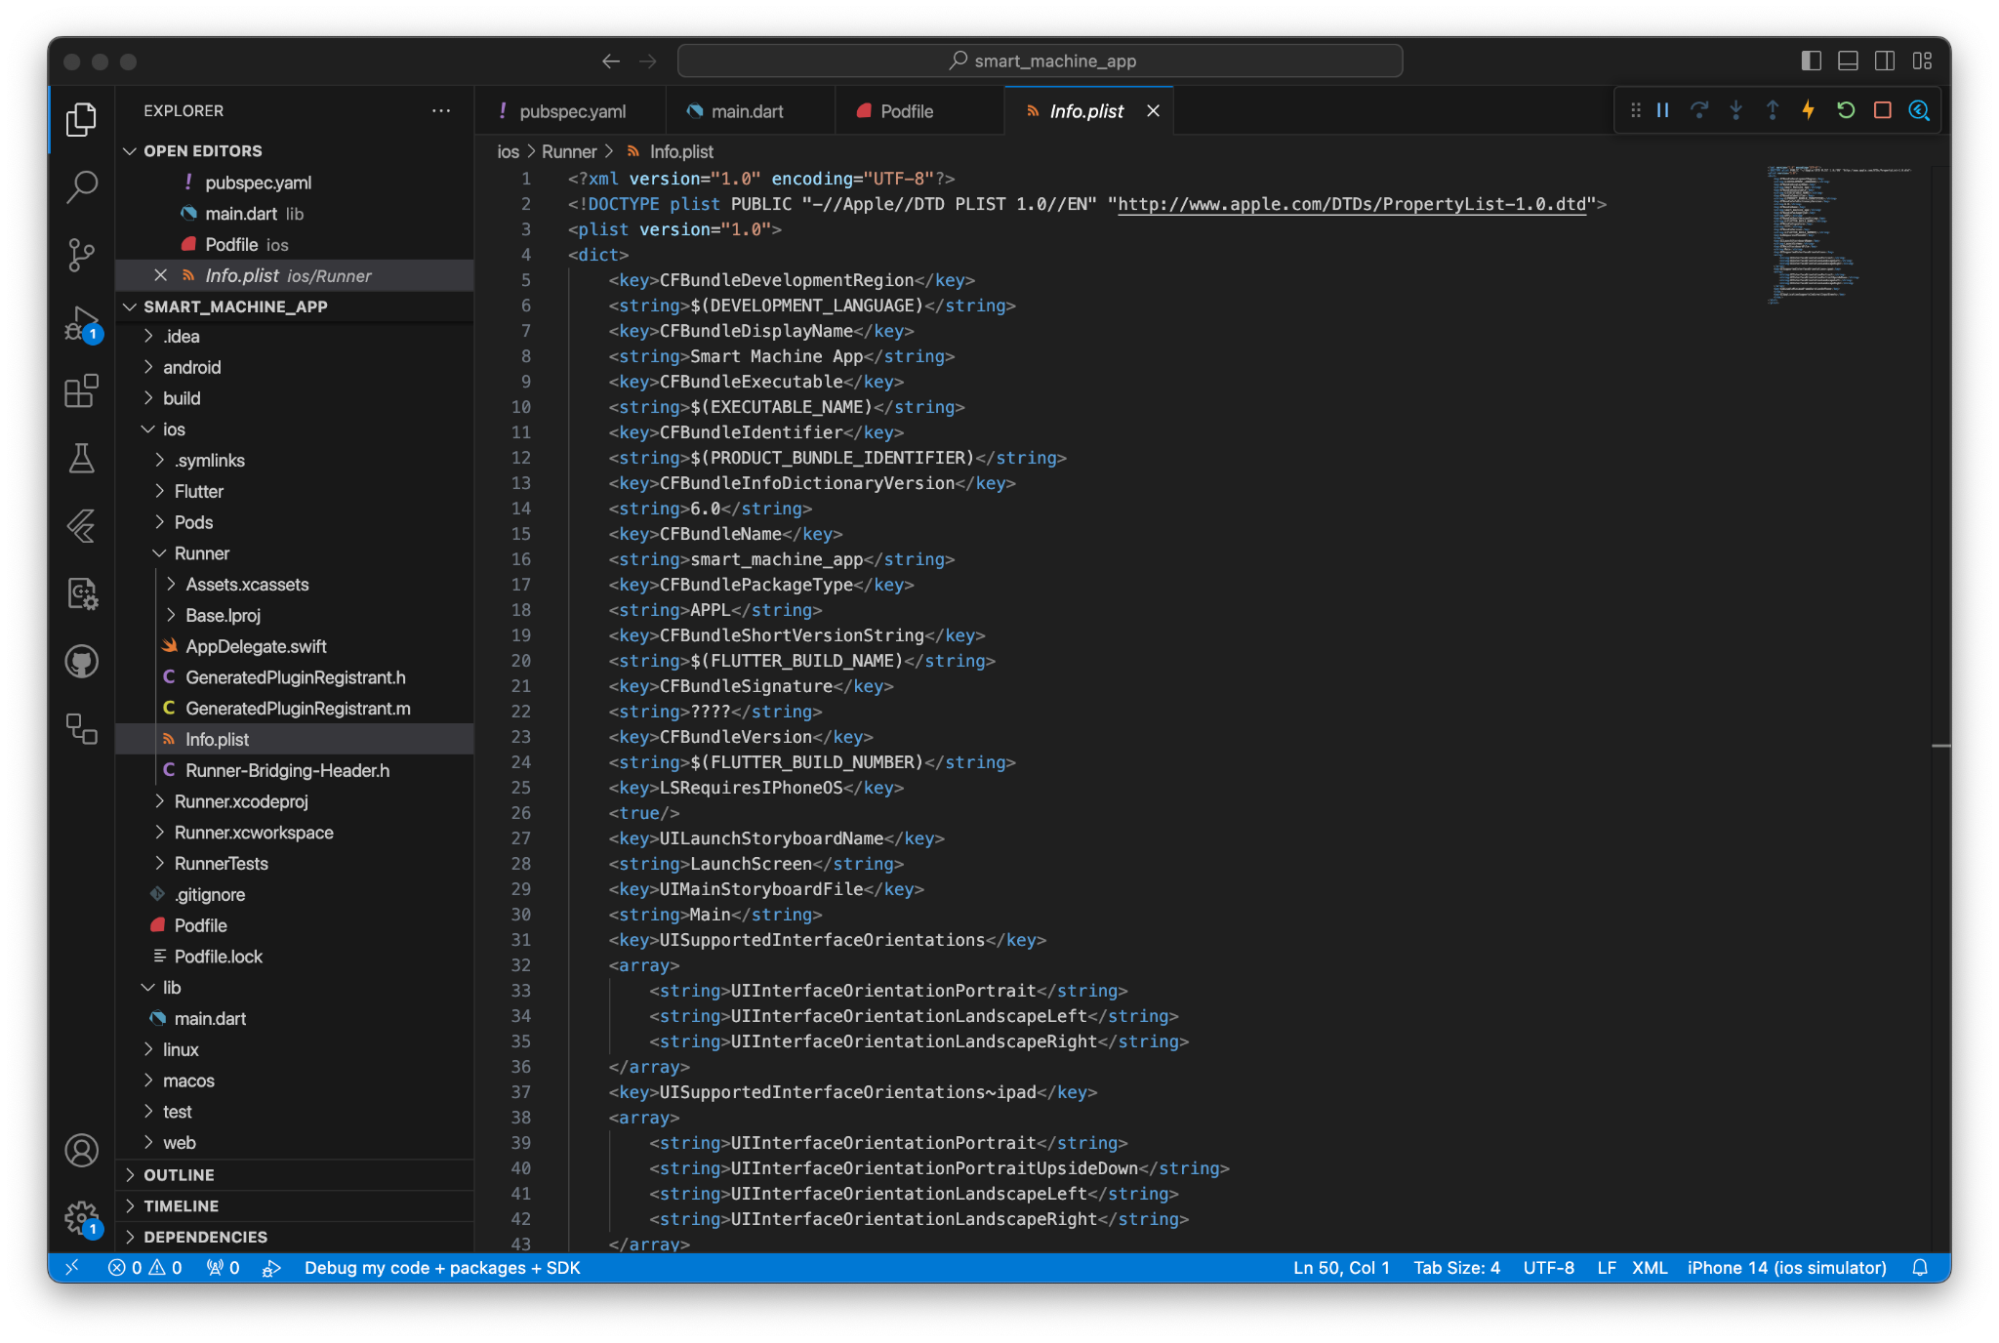 The info.plist file open in VS Code. The second line includes 'doctype plist public' and an Apple URL. The fourth line is a dict tag. The fifth line is a key, and subsequent lines contain keys, strings and arrays.